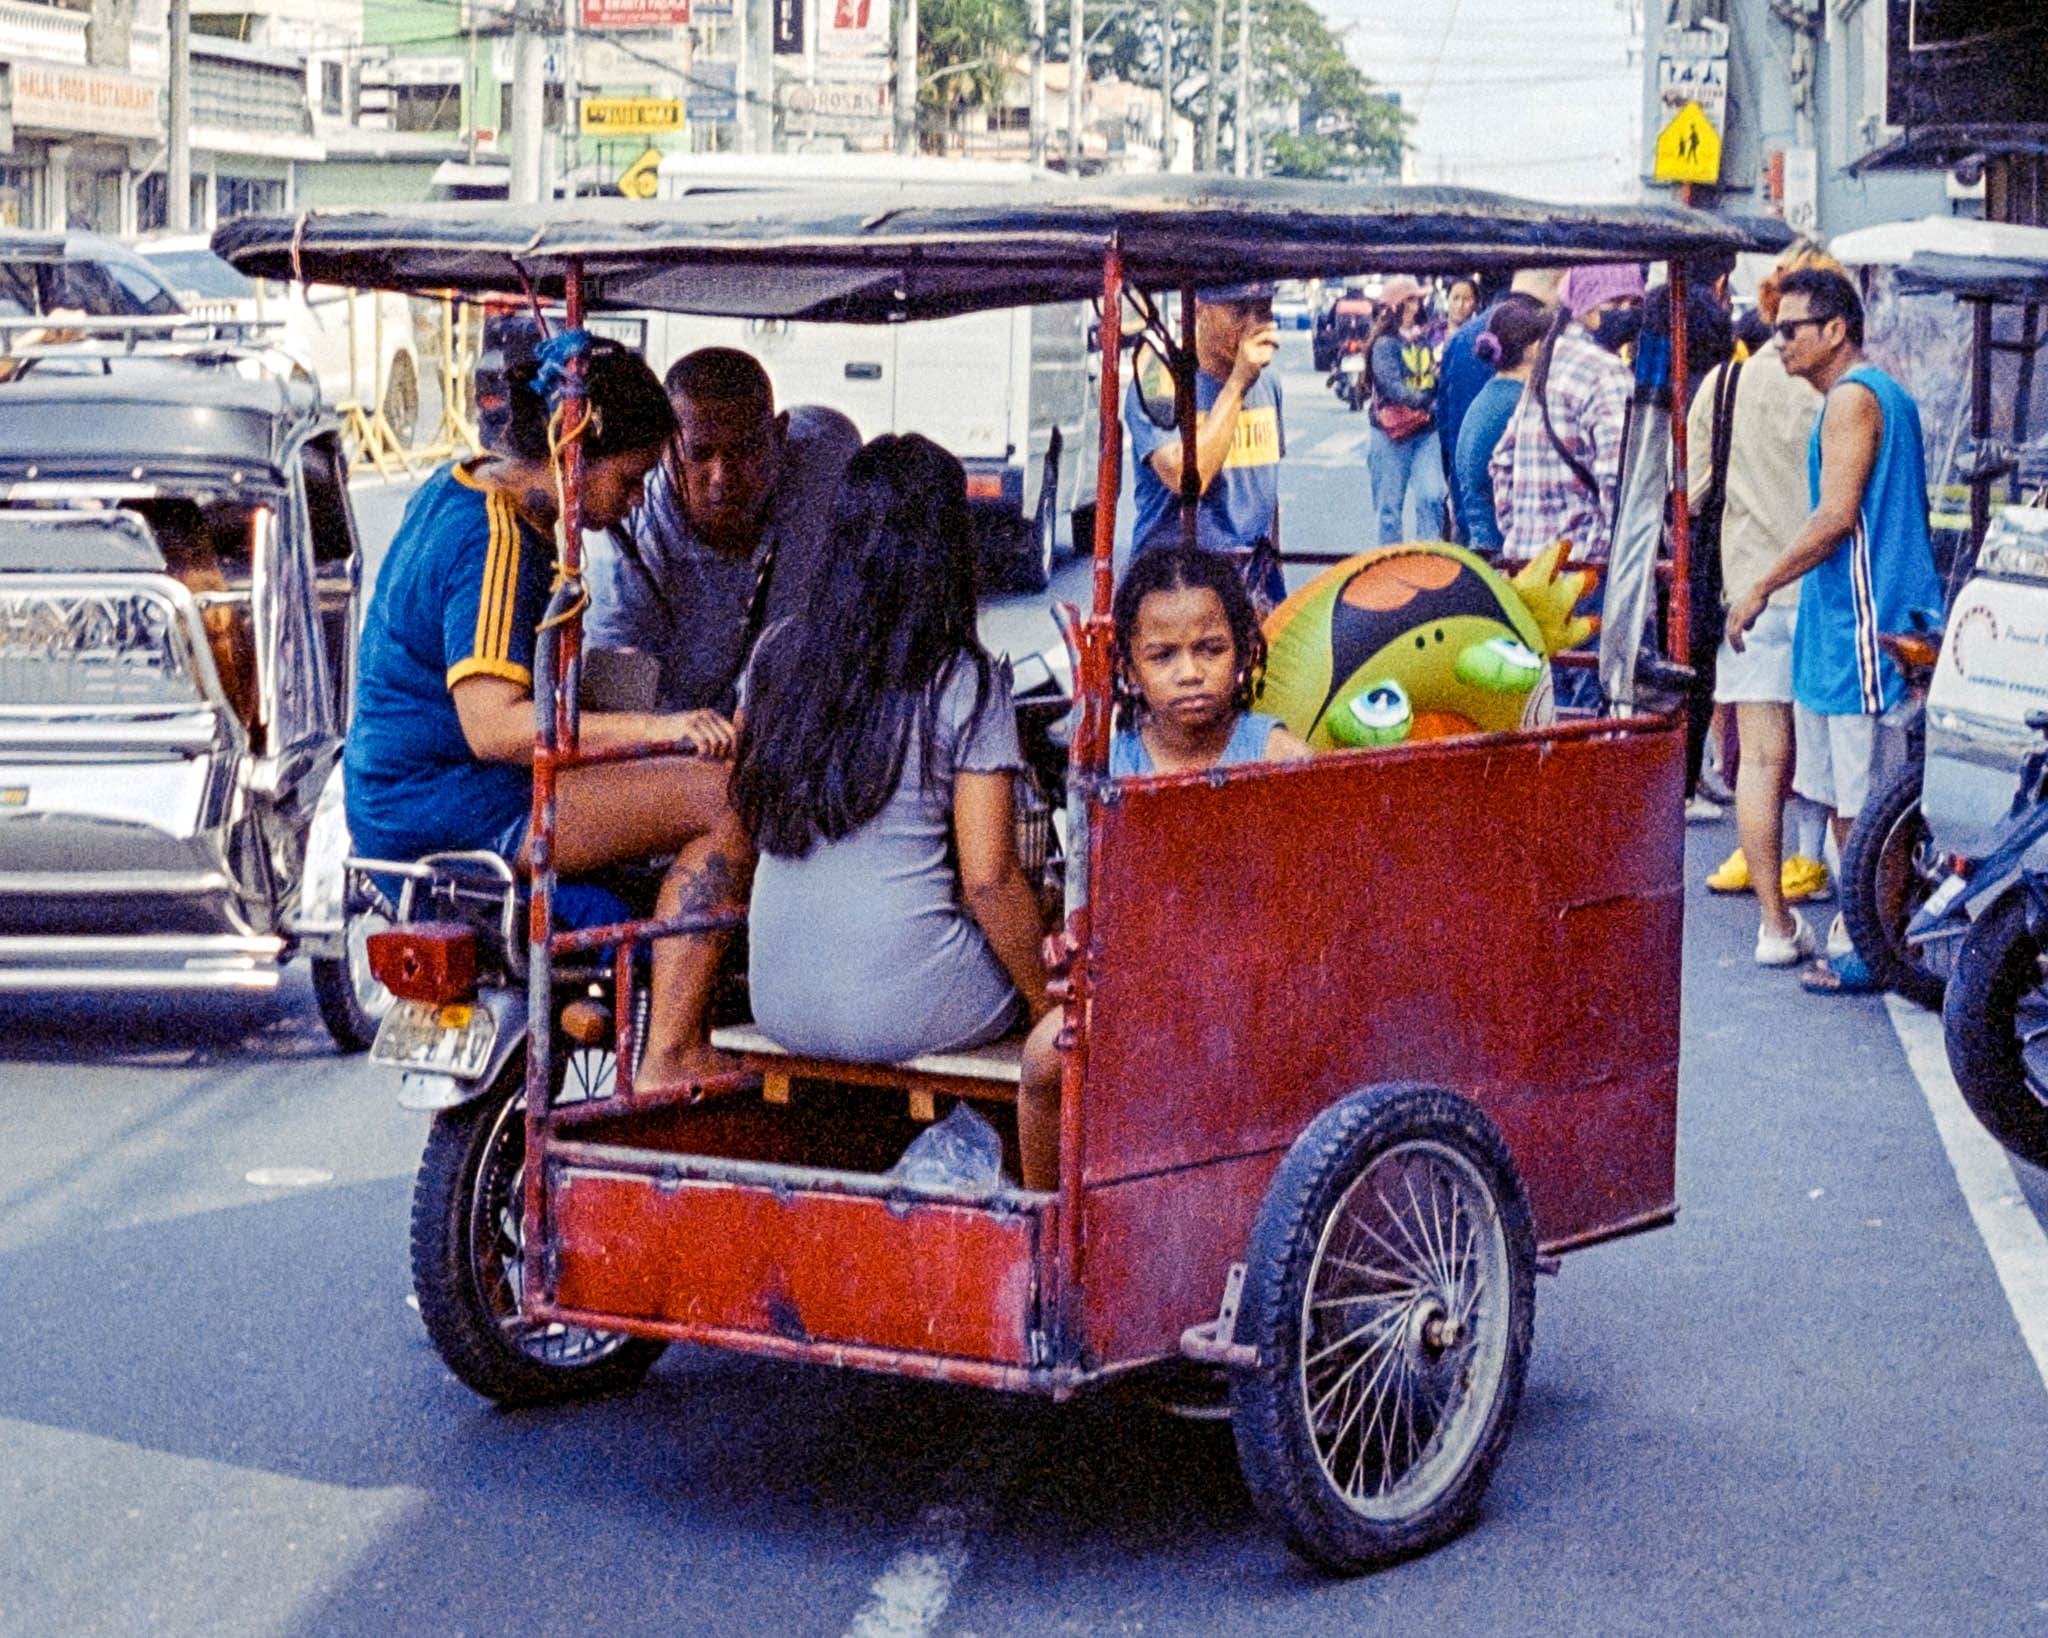 Family and stuffed bird on a trike amidst bustling Southeast Asian city street activities.